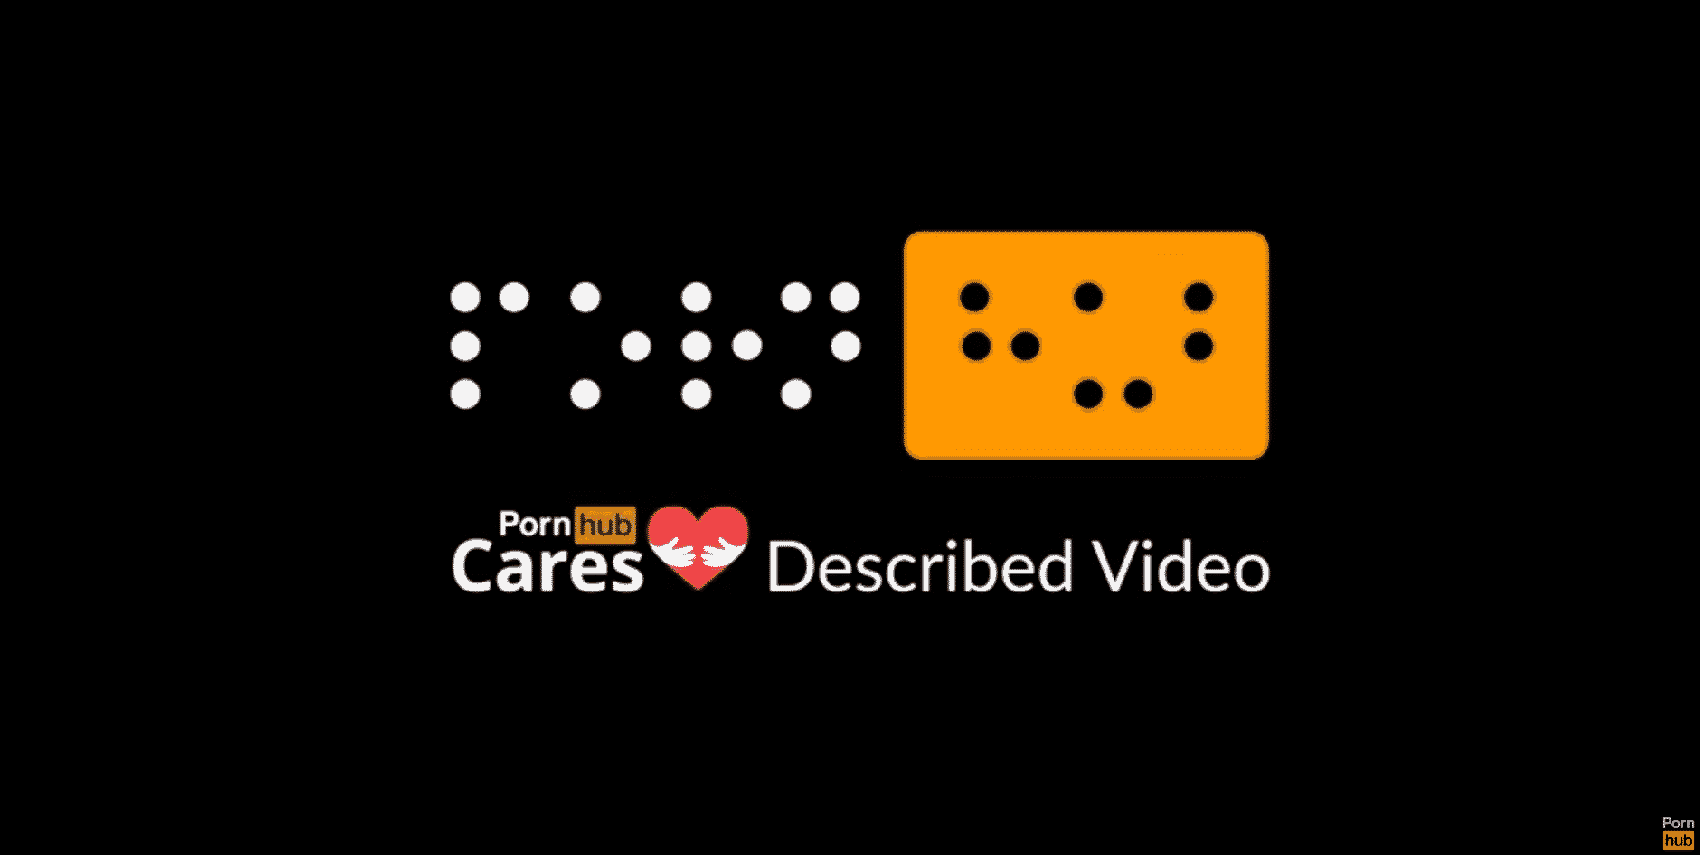 The logo for Pornhub's narrated videos for visually impaired.